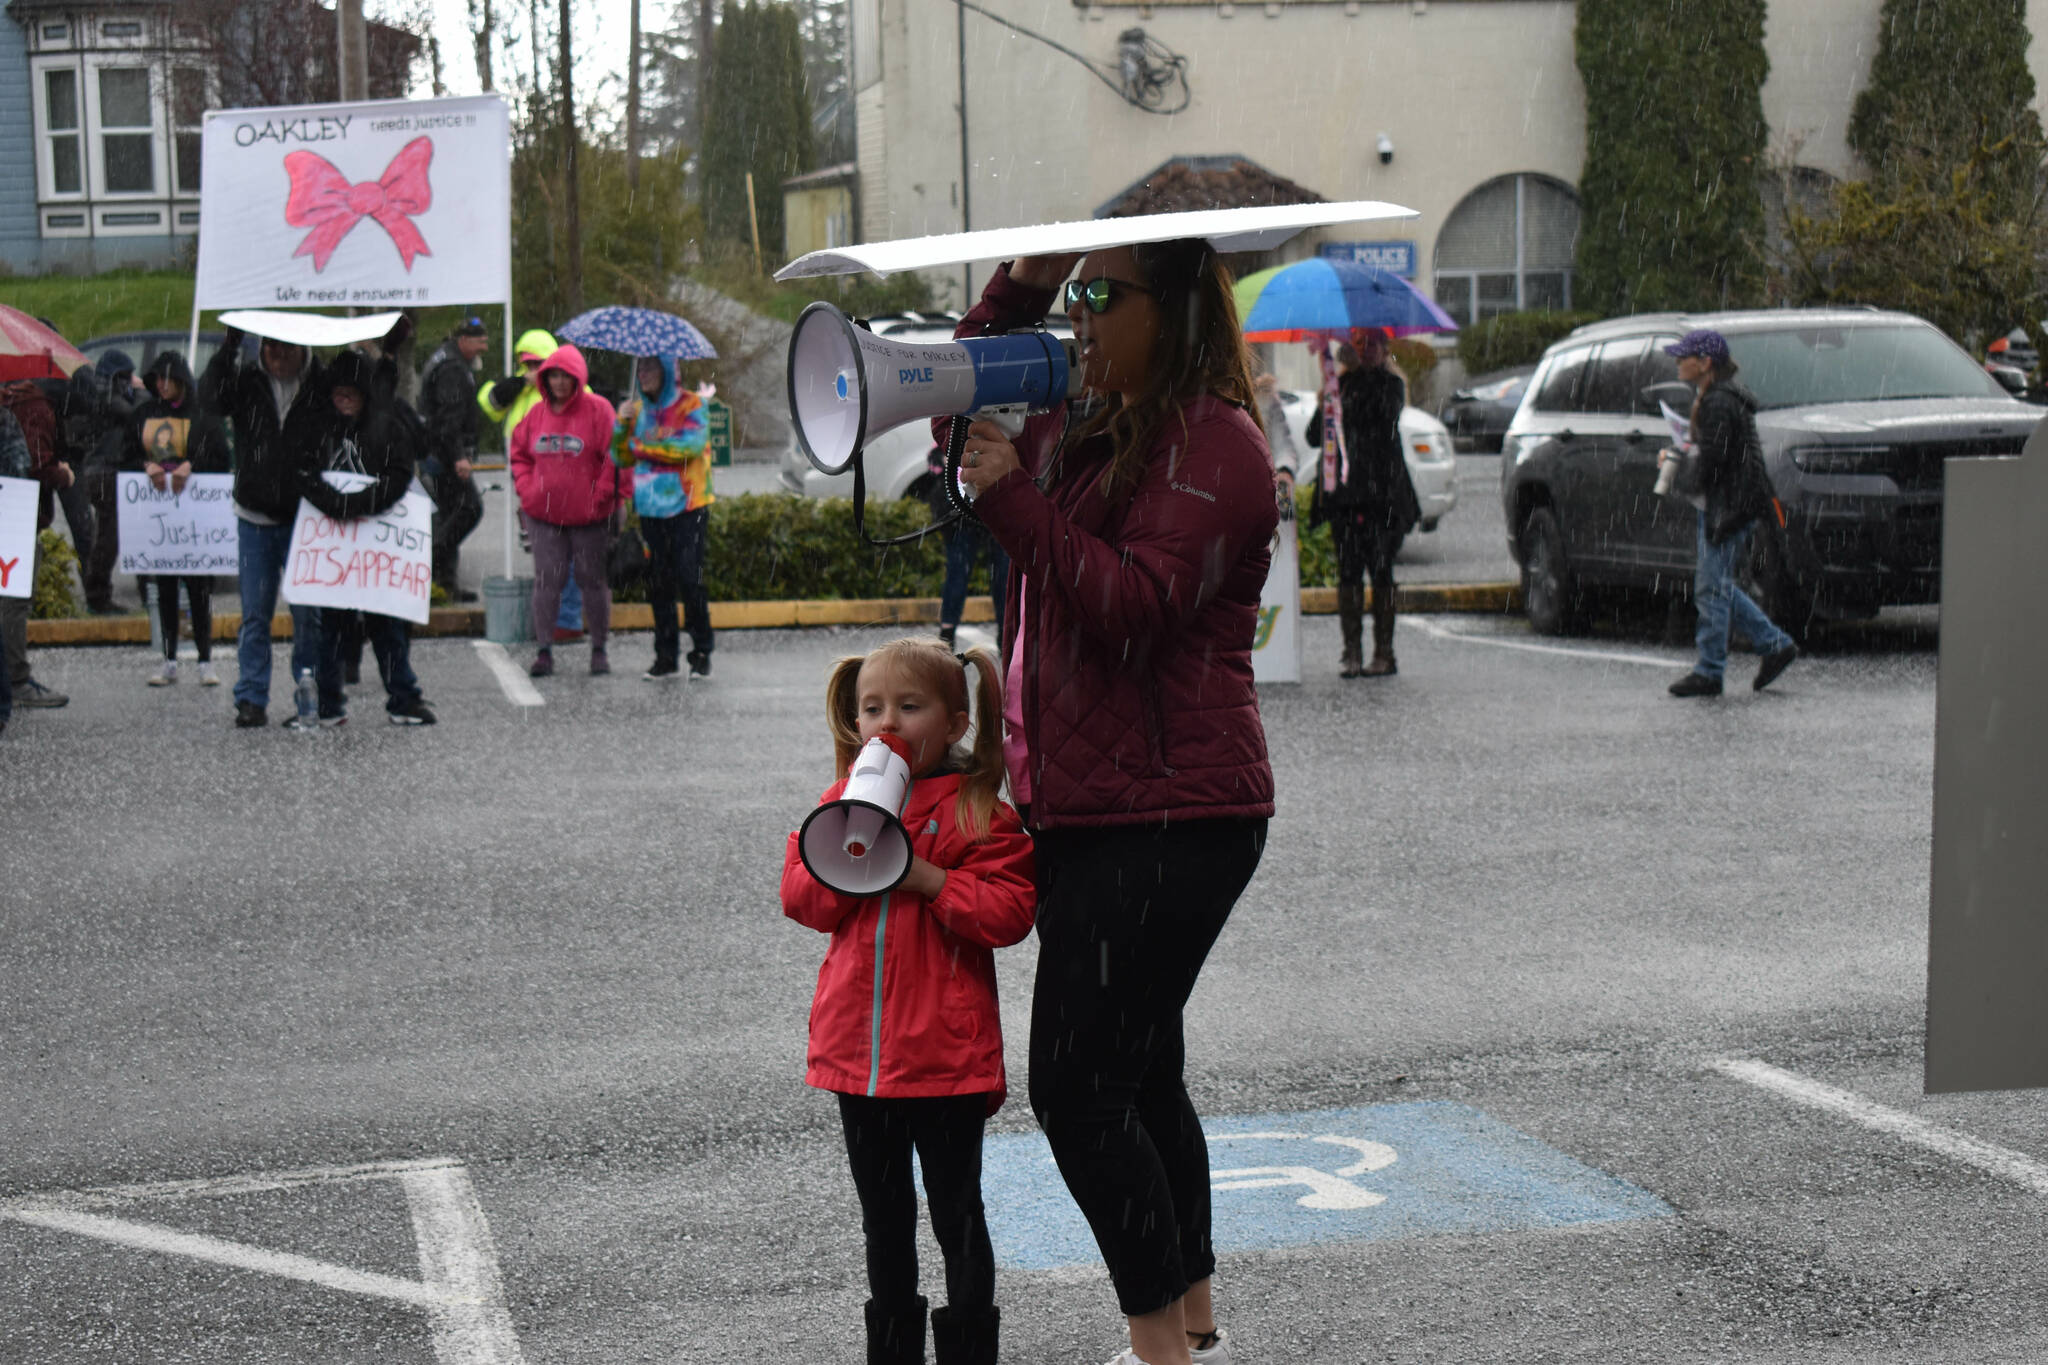 Five-year old Aubrey Wolfe shouts "Where is Oakley?" into her bullhorn beside her mother Jordan Wolfe, at the Gathering for Oakley, on Saturday, April 9, outside the Grays Harbor County Jail, in Montesano. Oakley's biological parents, Jordan Bowers and Andrew Carlson, are both inmates inside the jail. (Matthew N. Wells | The Daily World)